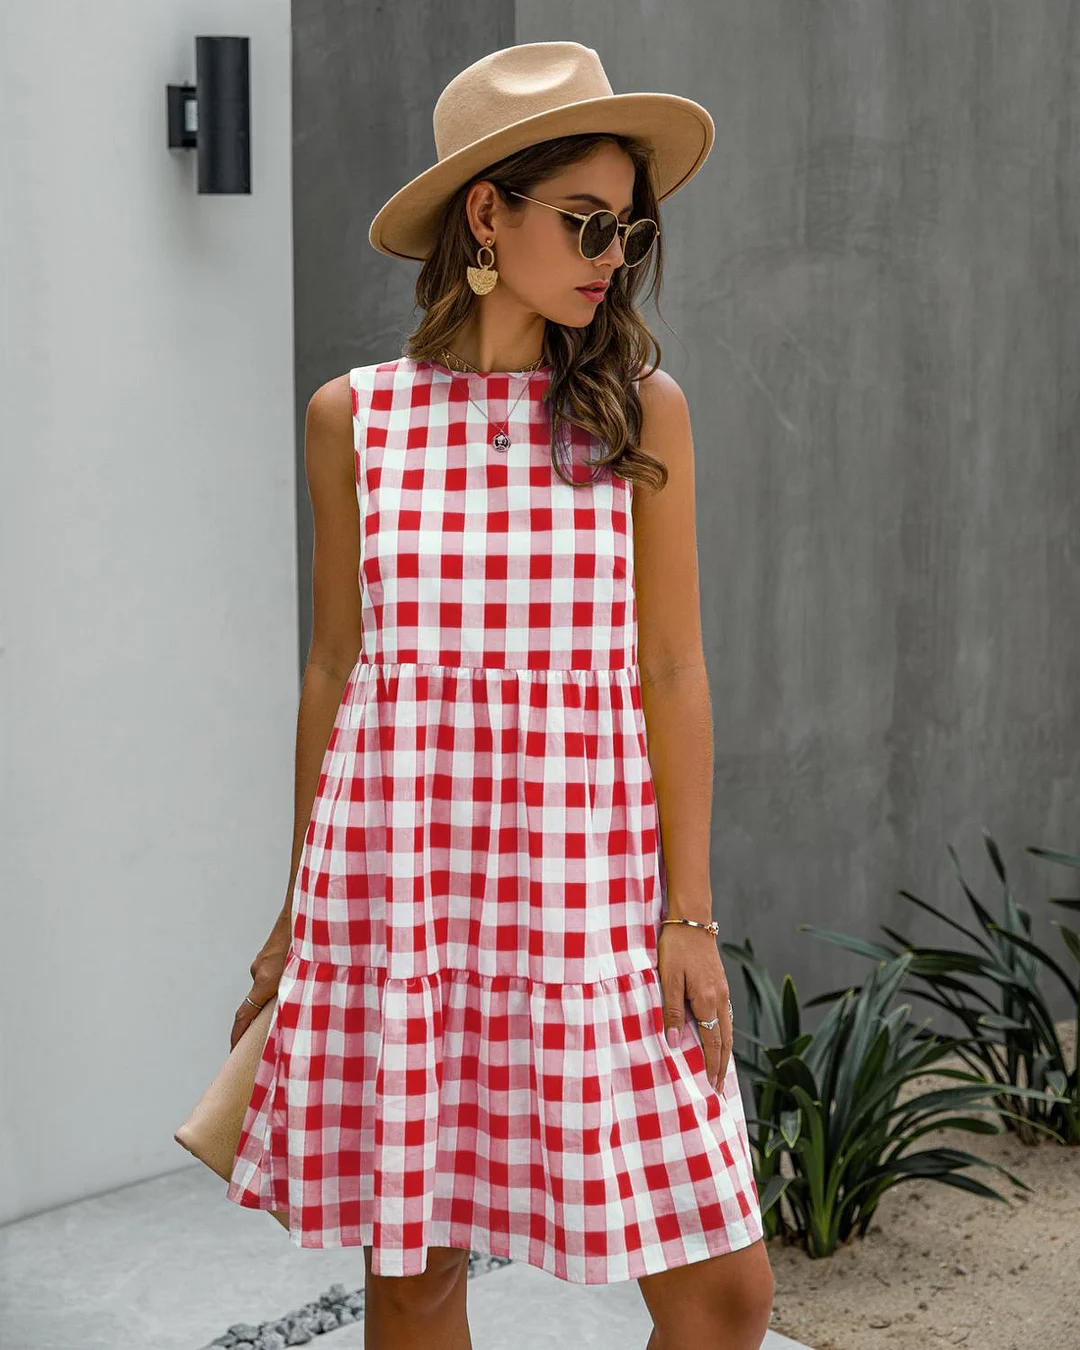 Plaid Dress Women Black A-line Sundresses Pockets Summer Causal Blue Loose Fit Clothing Free People Red Clothes For Women